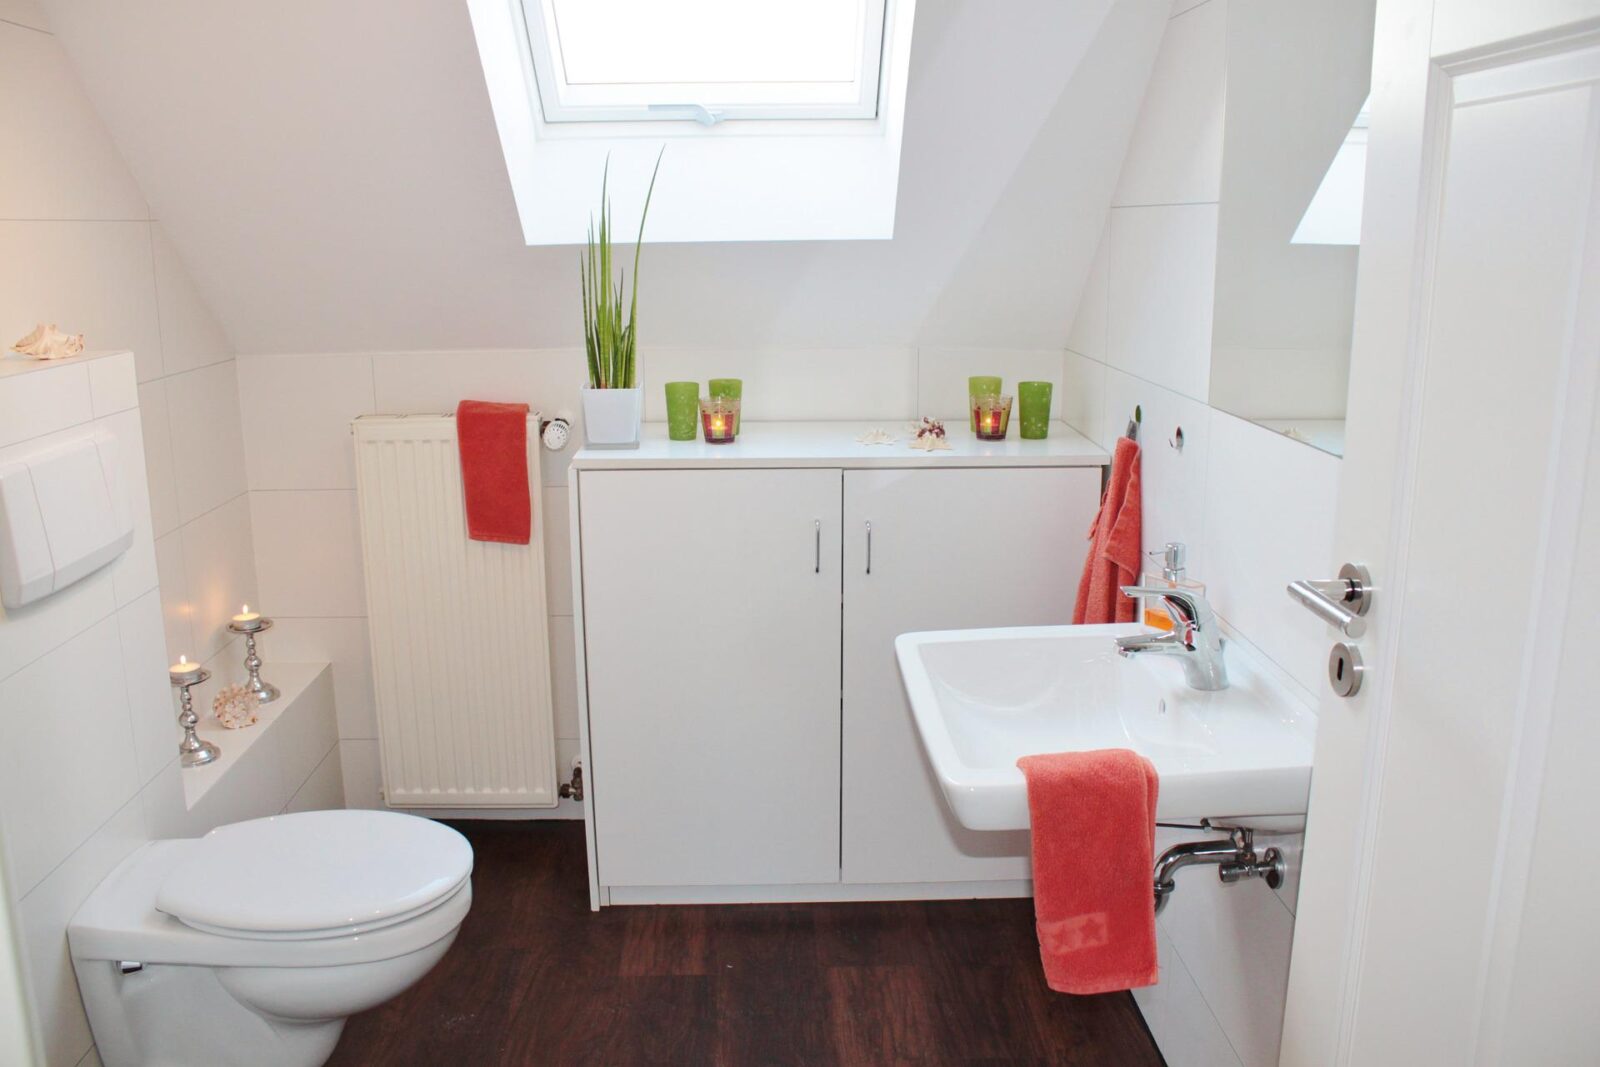 Bathroom Fitting Services